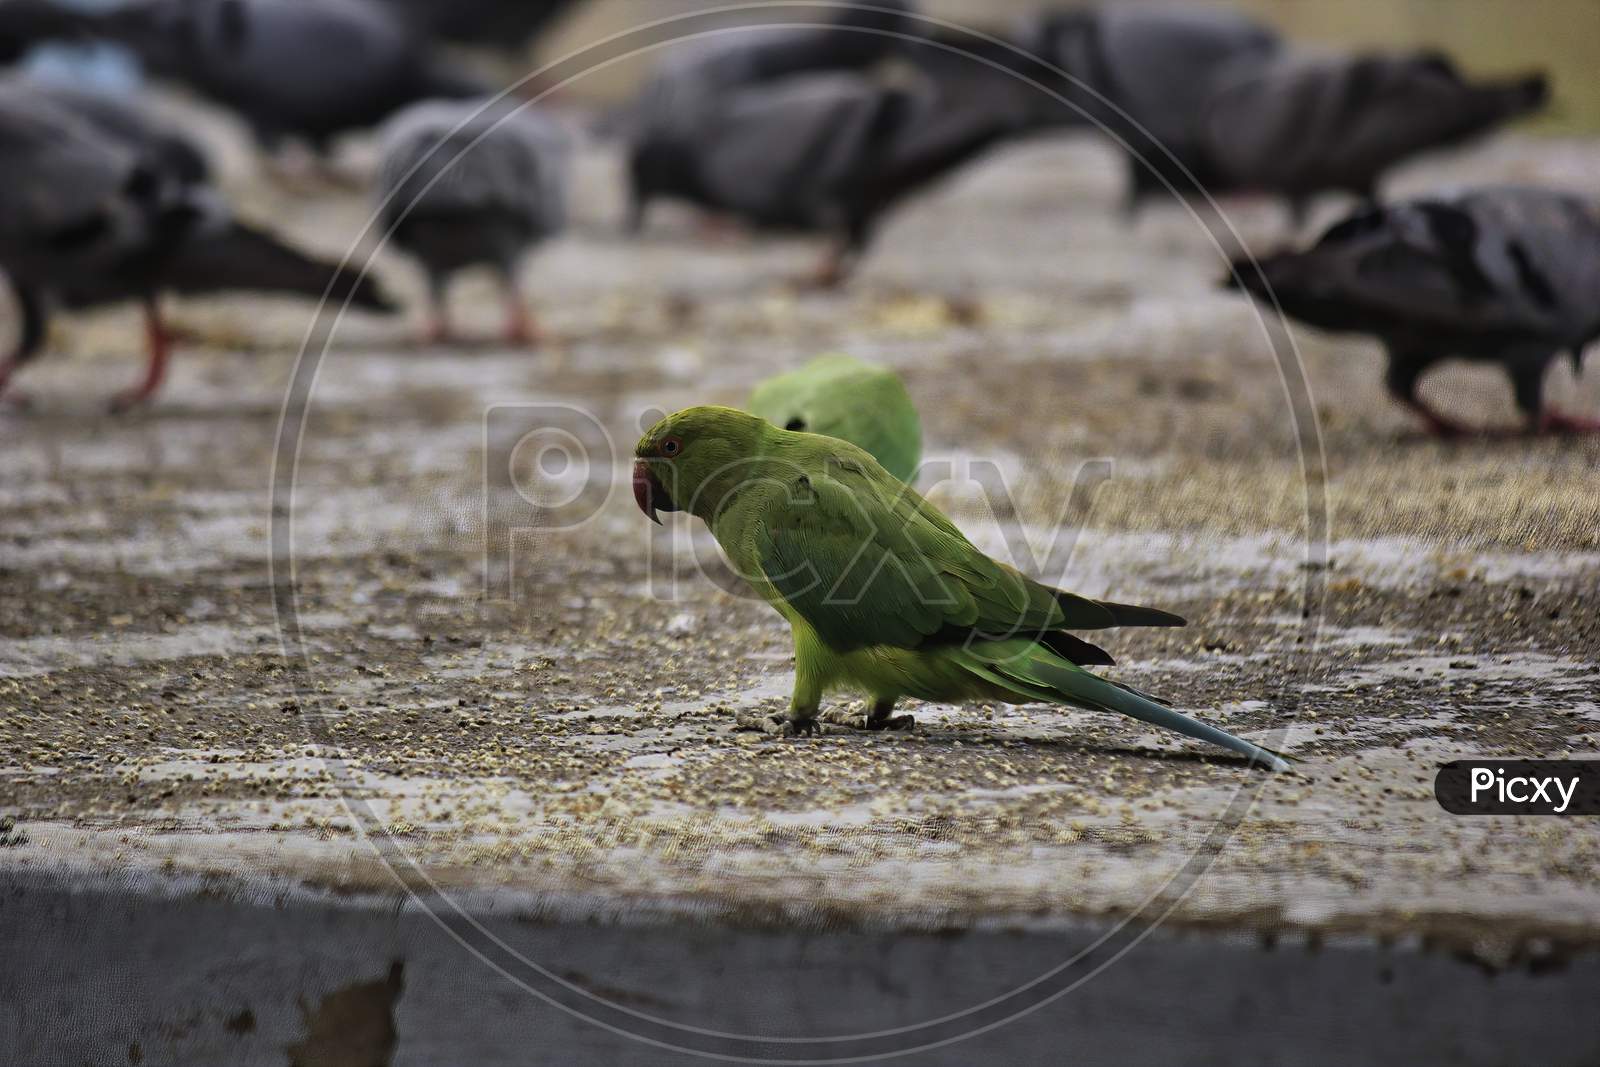 A Green Parrot In A Group Of Pigeon